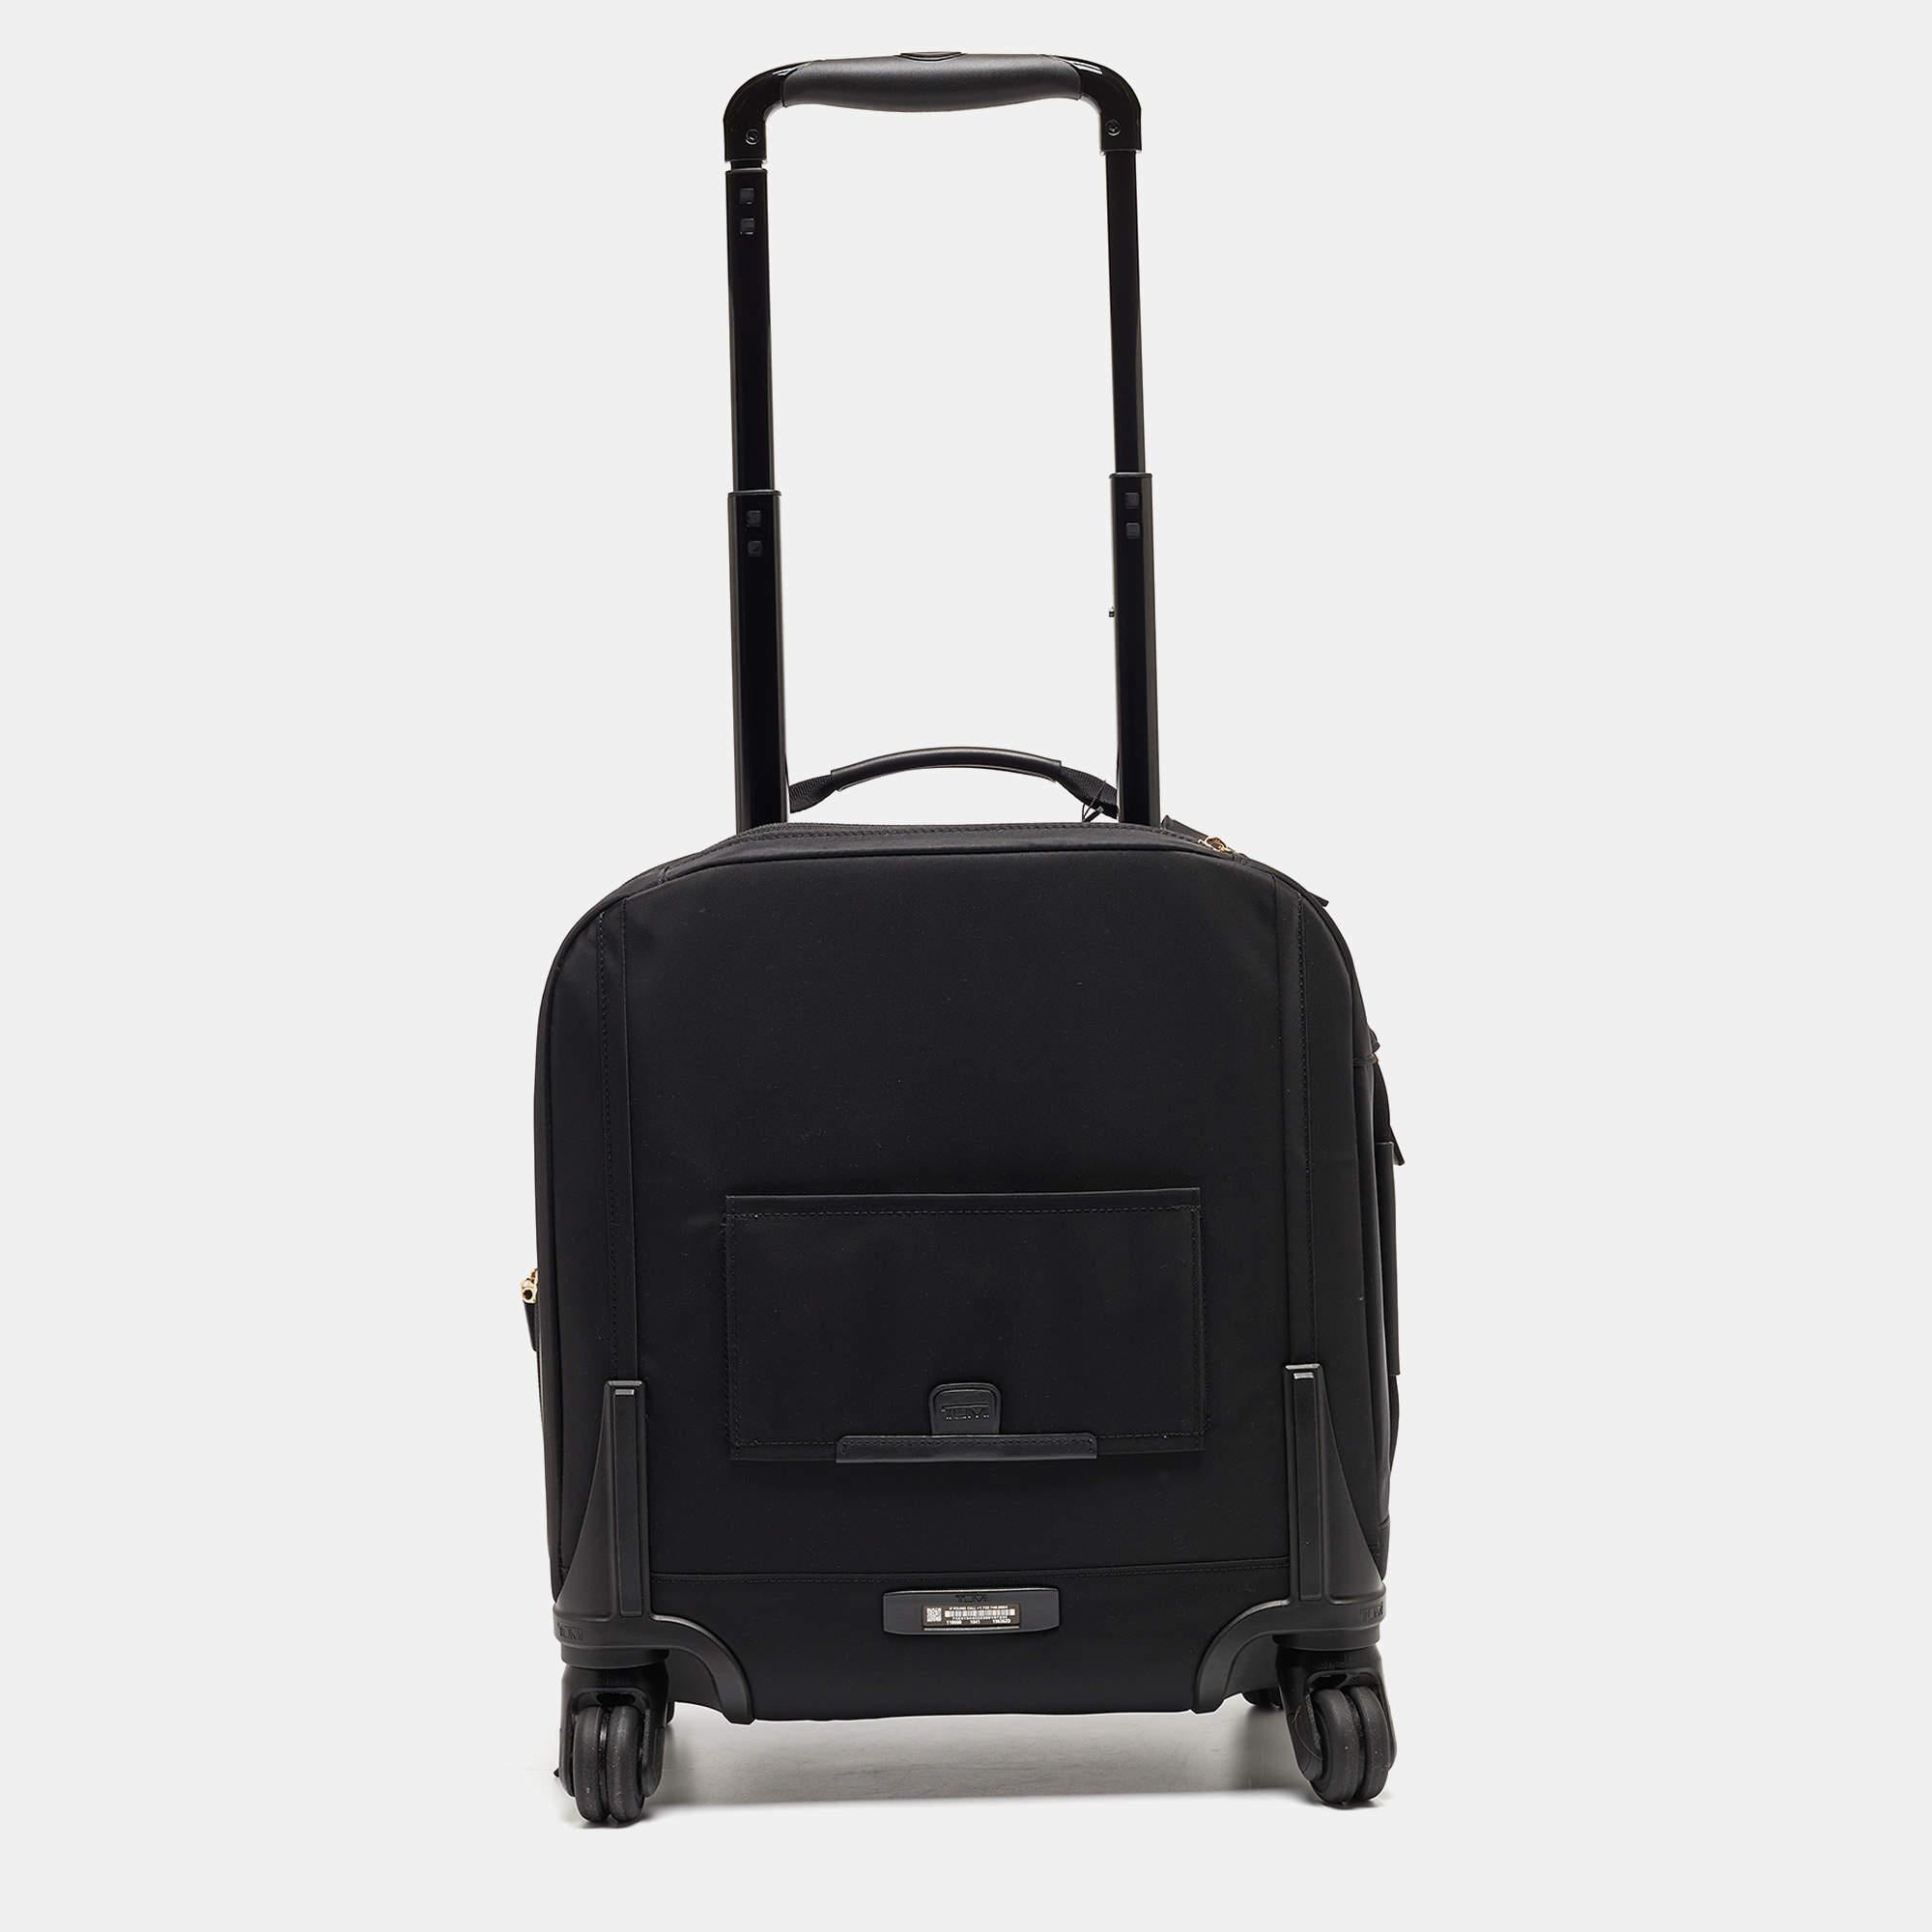 Crafted for the discerning traveler, the TUMI luggage embodies practicality and style. Made from durable nylon, it offers ample space for essentials without compromising on sleekness. With its compact design and thoughtful features, it's a